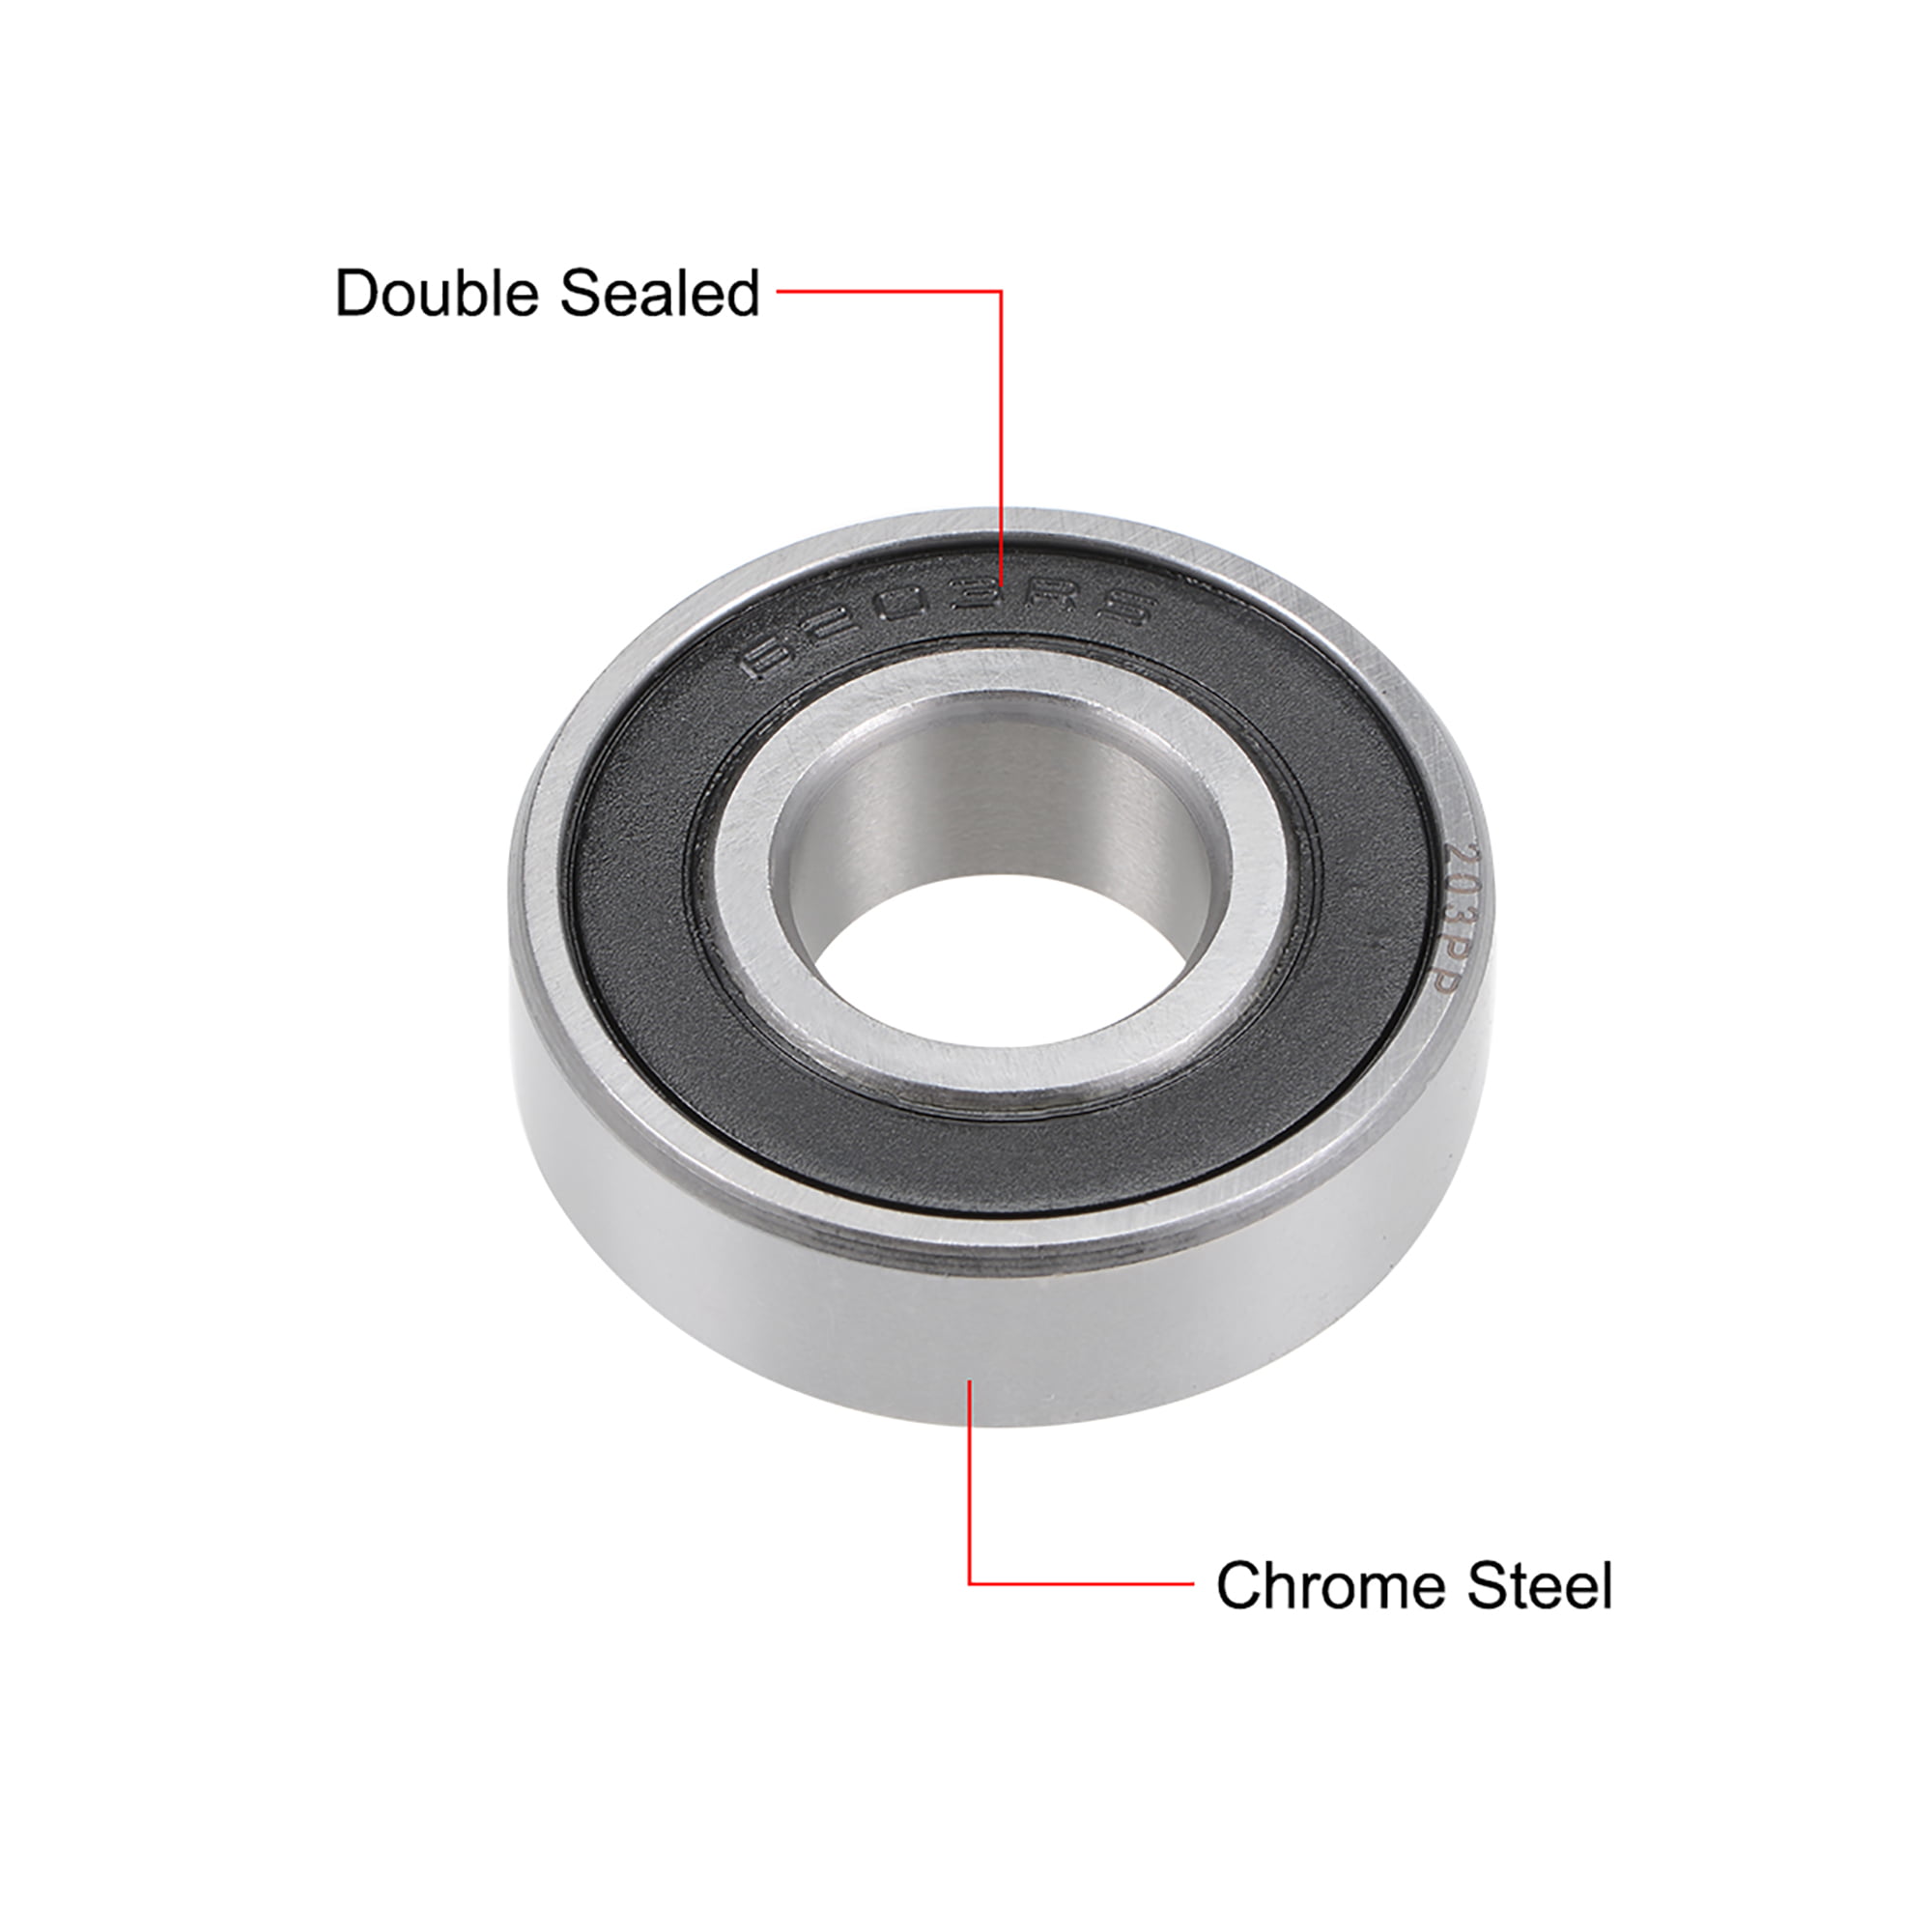 uxcell 6203-2RS Deep Groove Ball Bearing 17x40x12mm Double Sealed Chrome Bearings 2pcs 